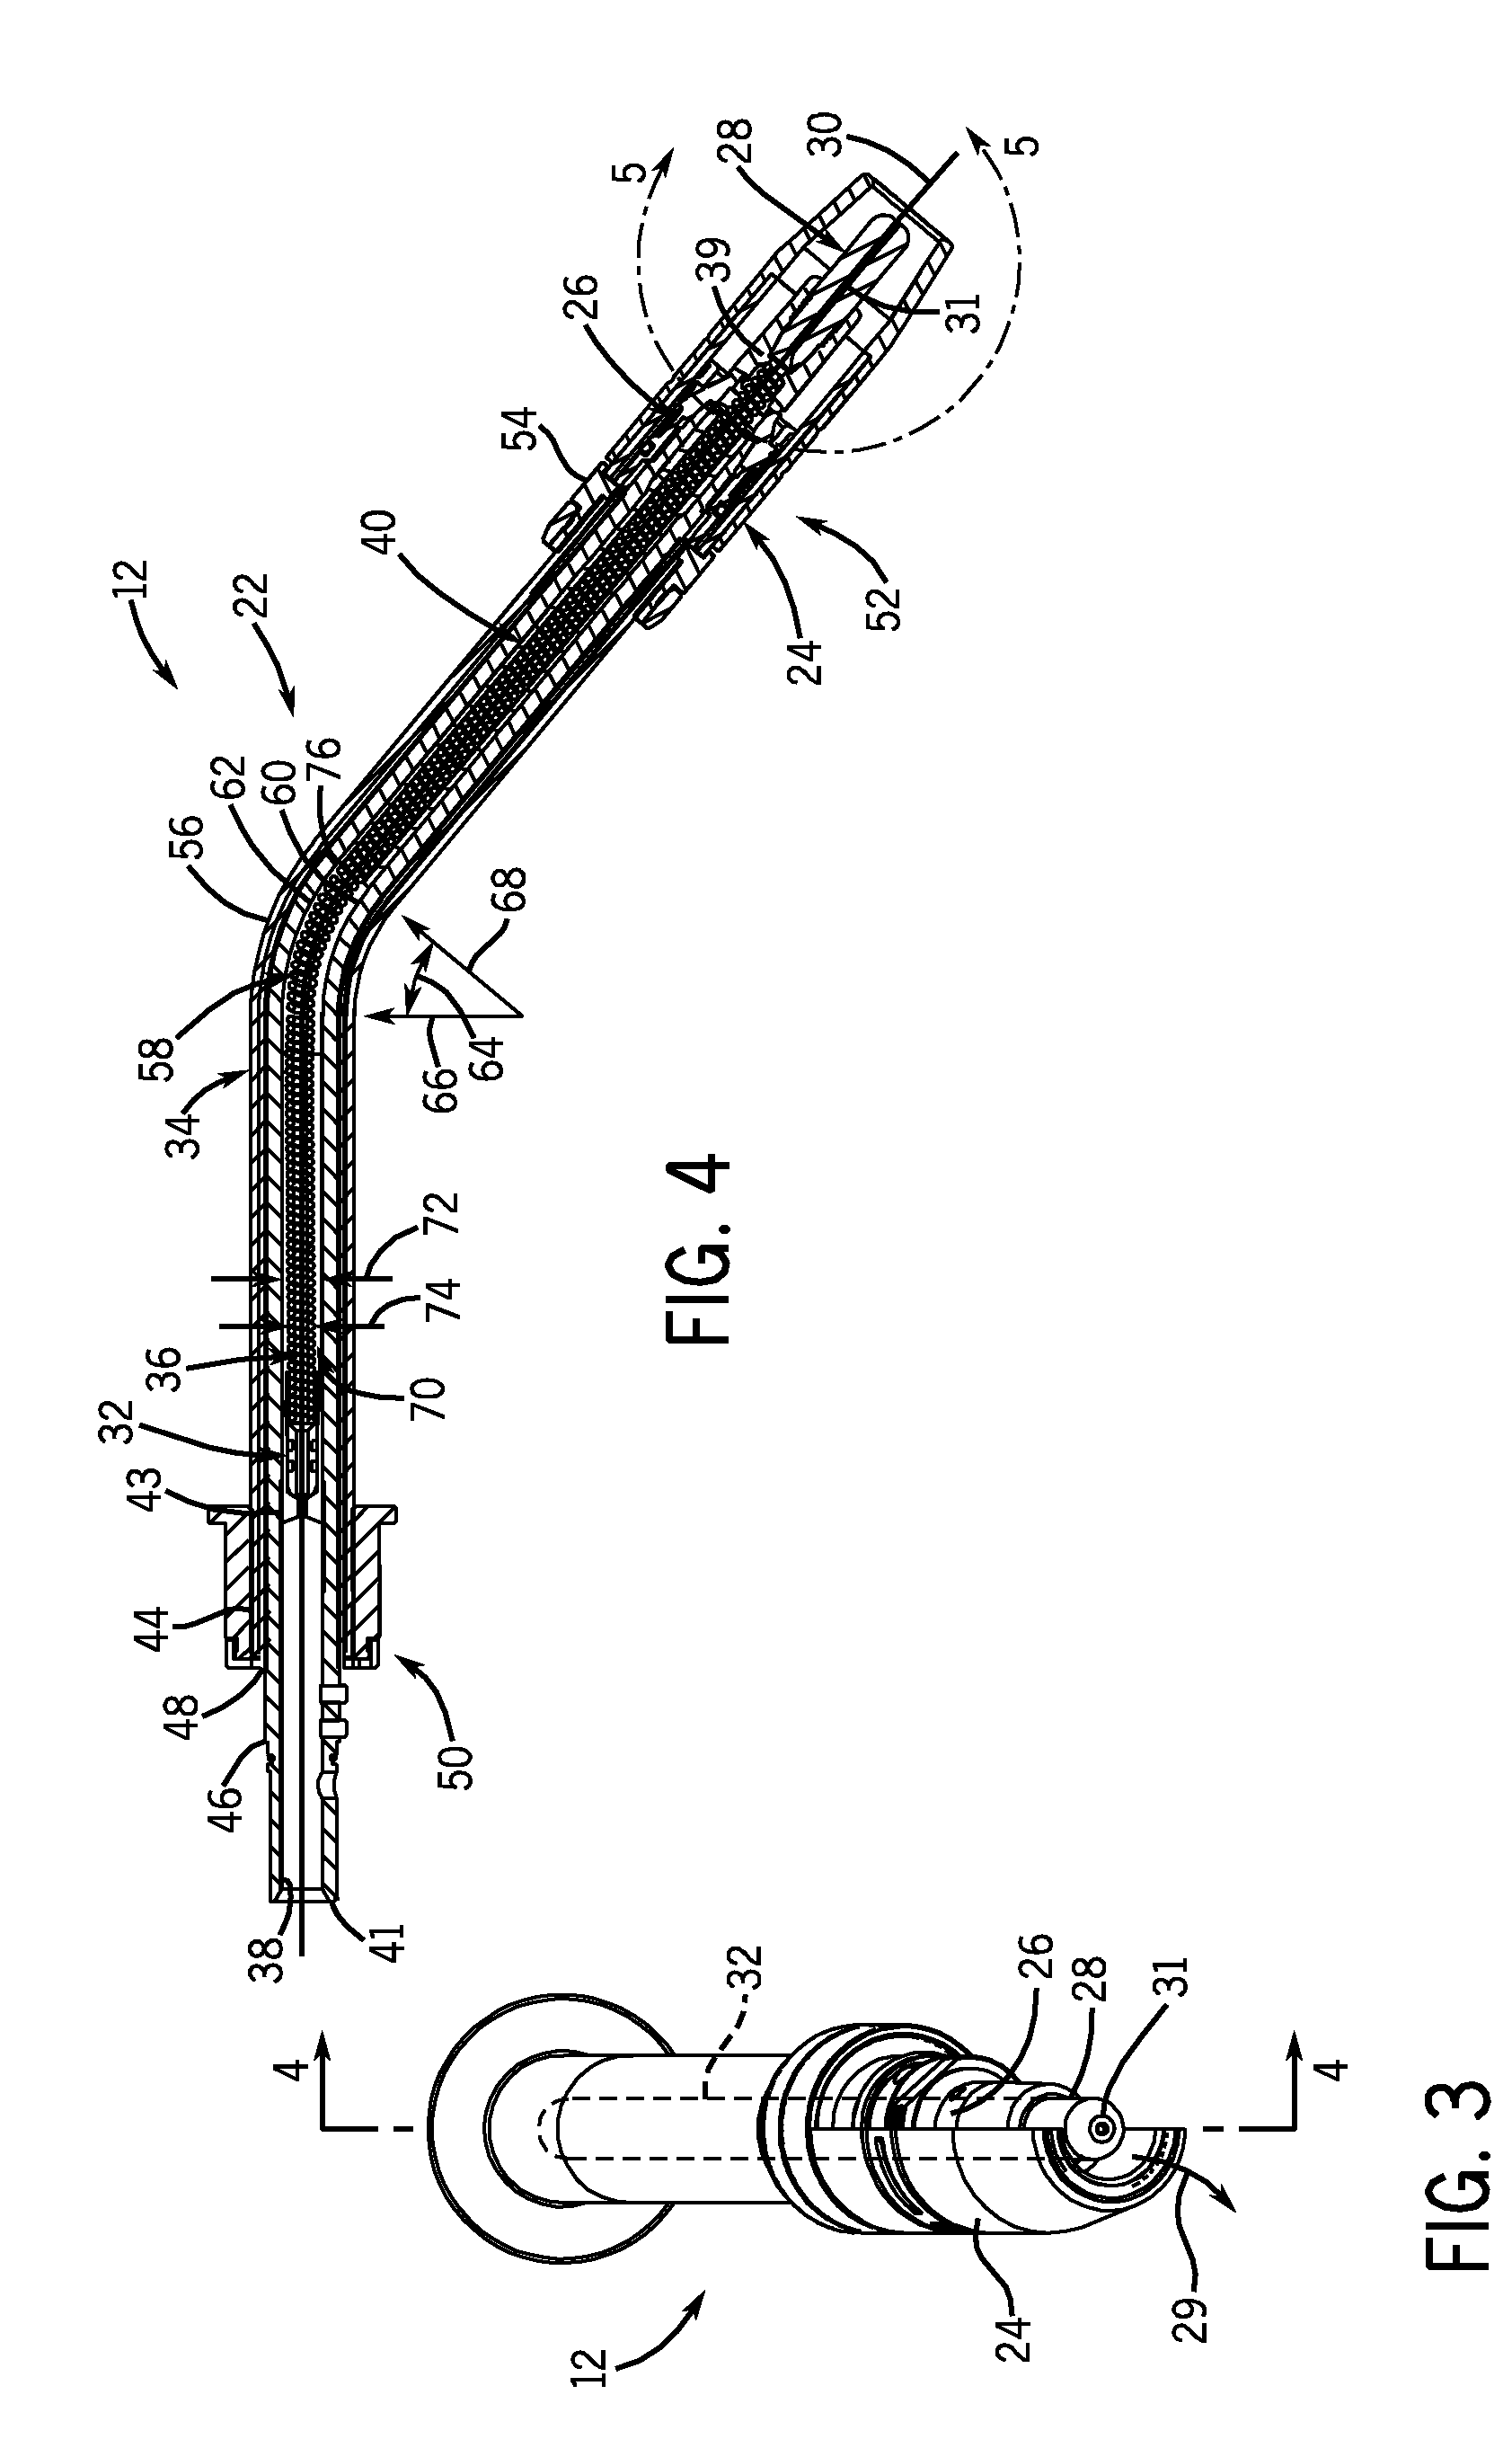 Welding system and method having controlled liner contour and welding wire curvature